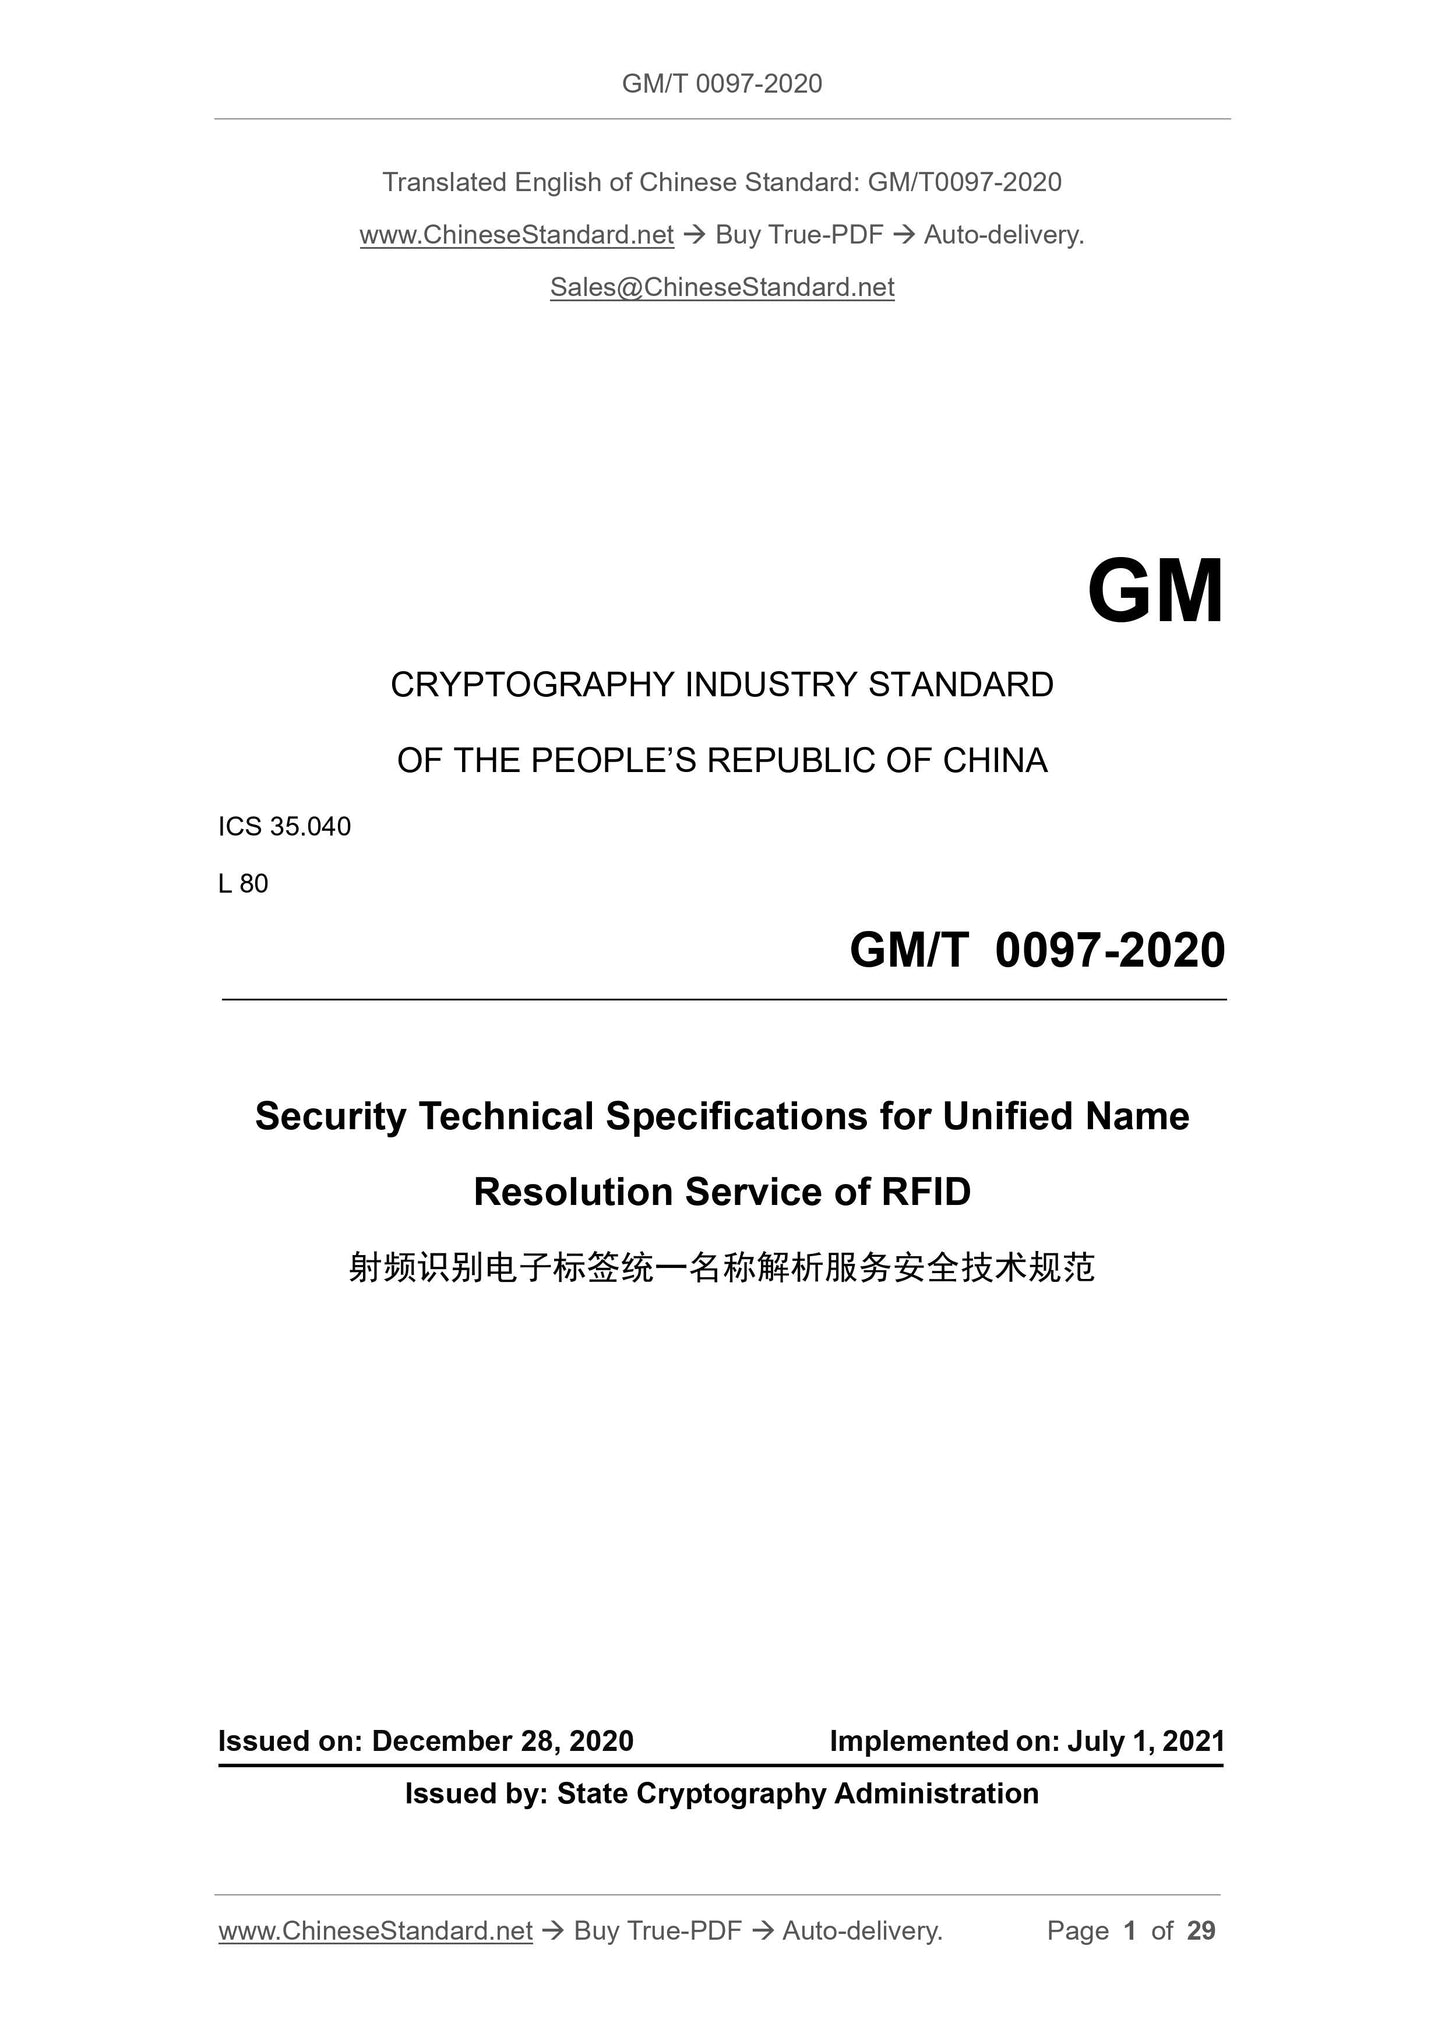 GM/T 0097-2020 Page 1